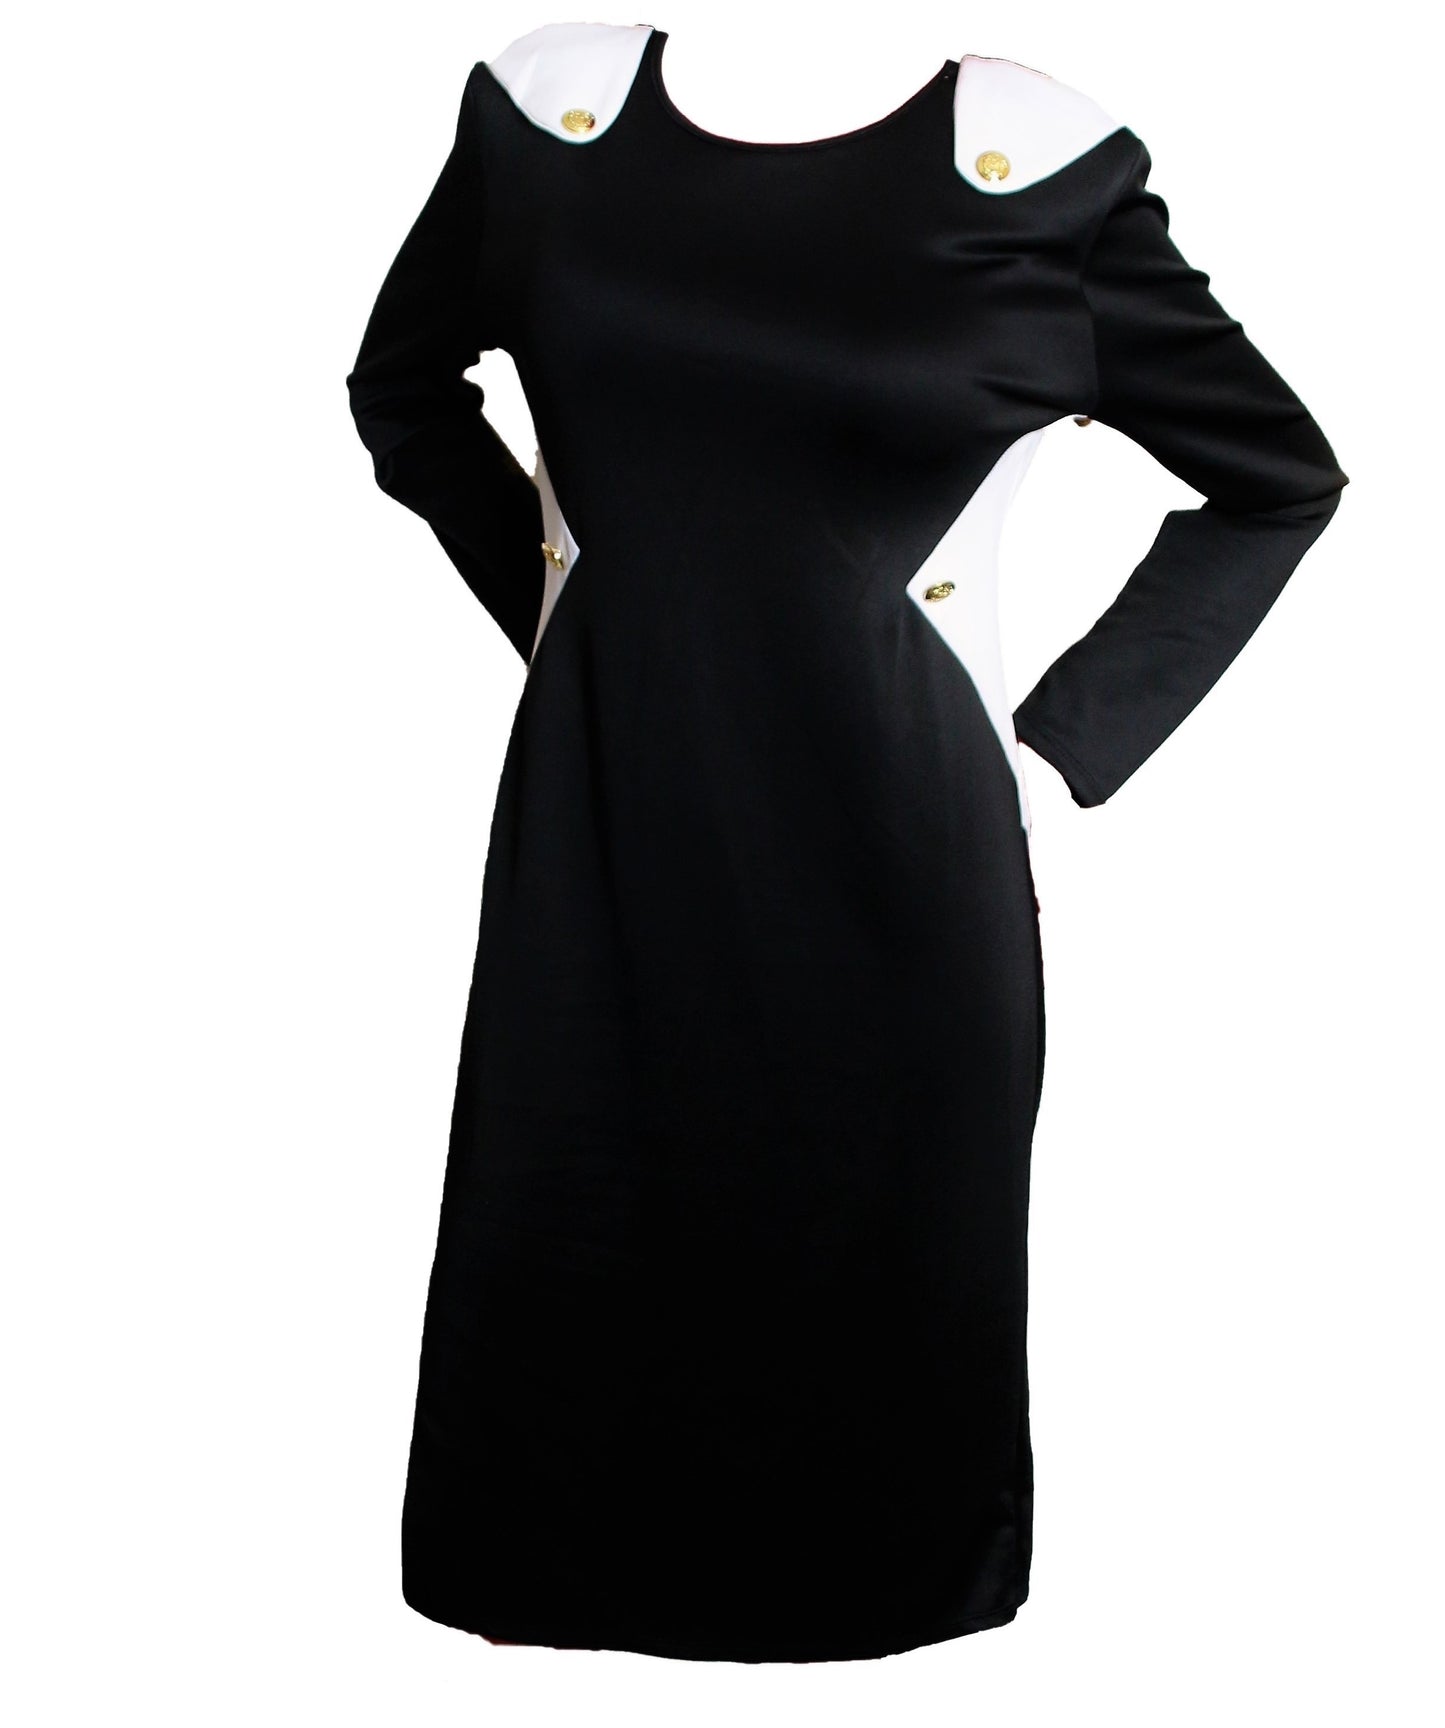 Quum Plus Size Long sleeve black  dress with  white  Shoulder accented with  gold buttons